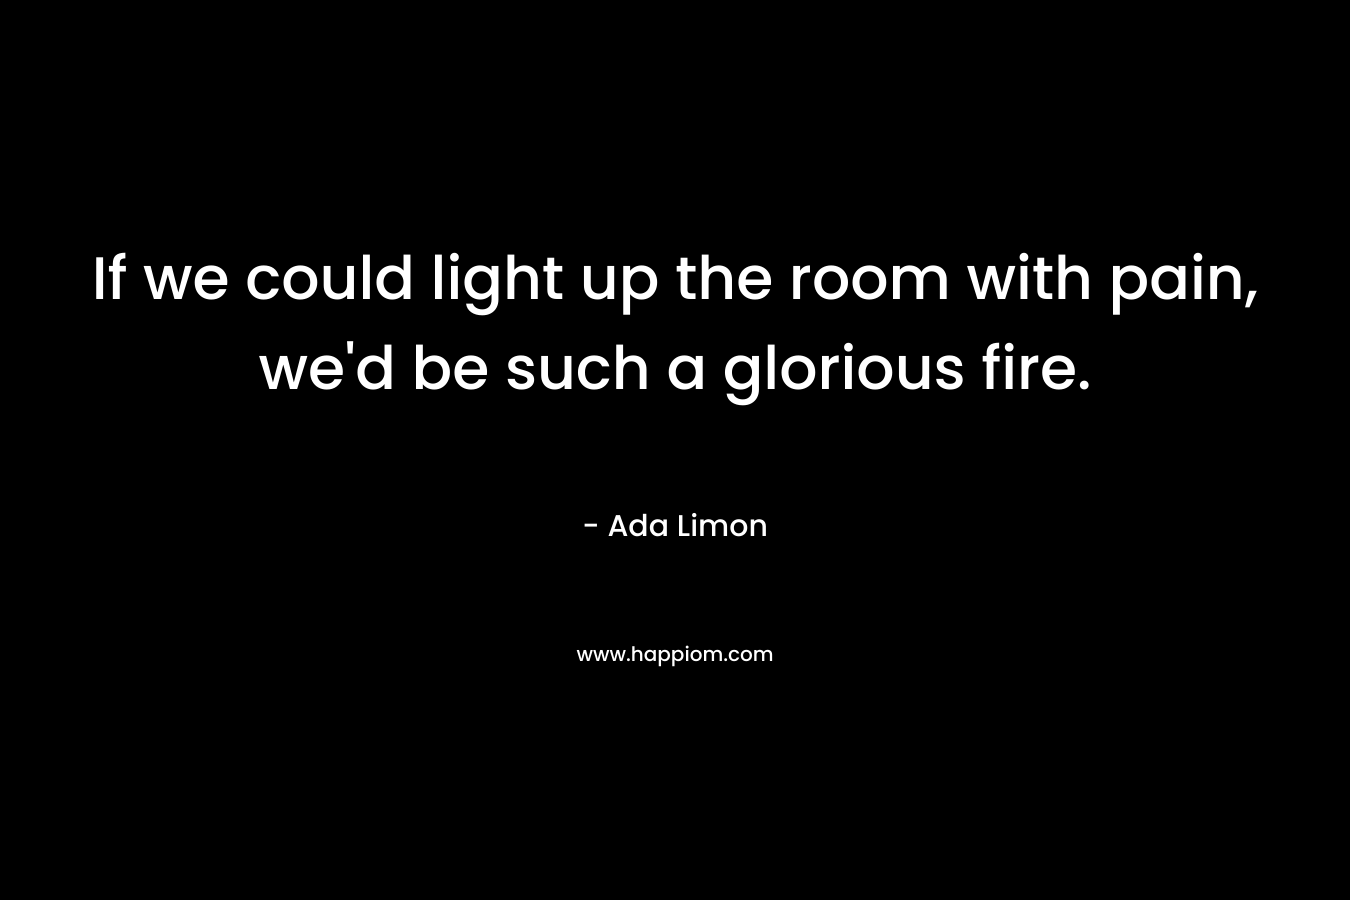 If we could light up the room with pain, we’d be such a glorious fire. – Ada Limon